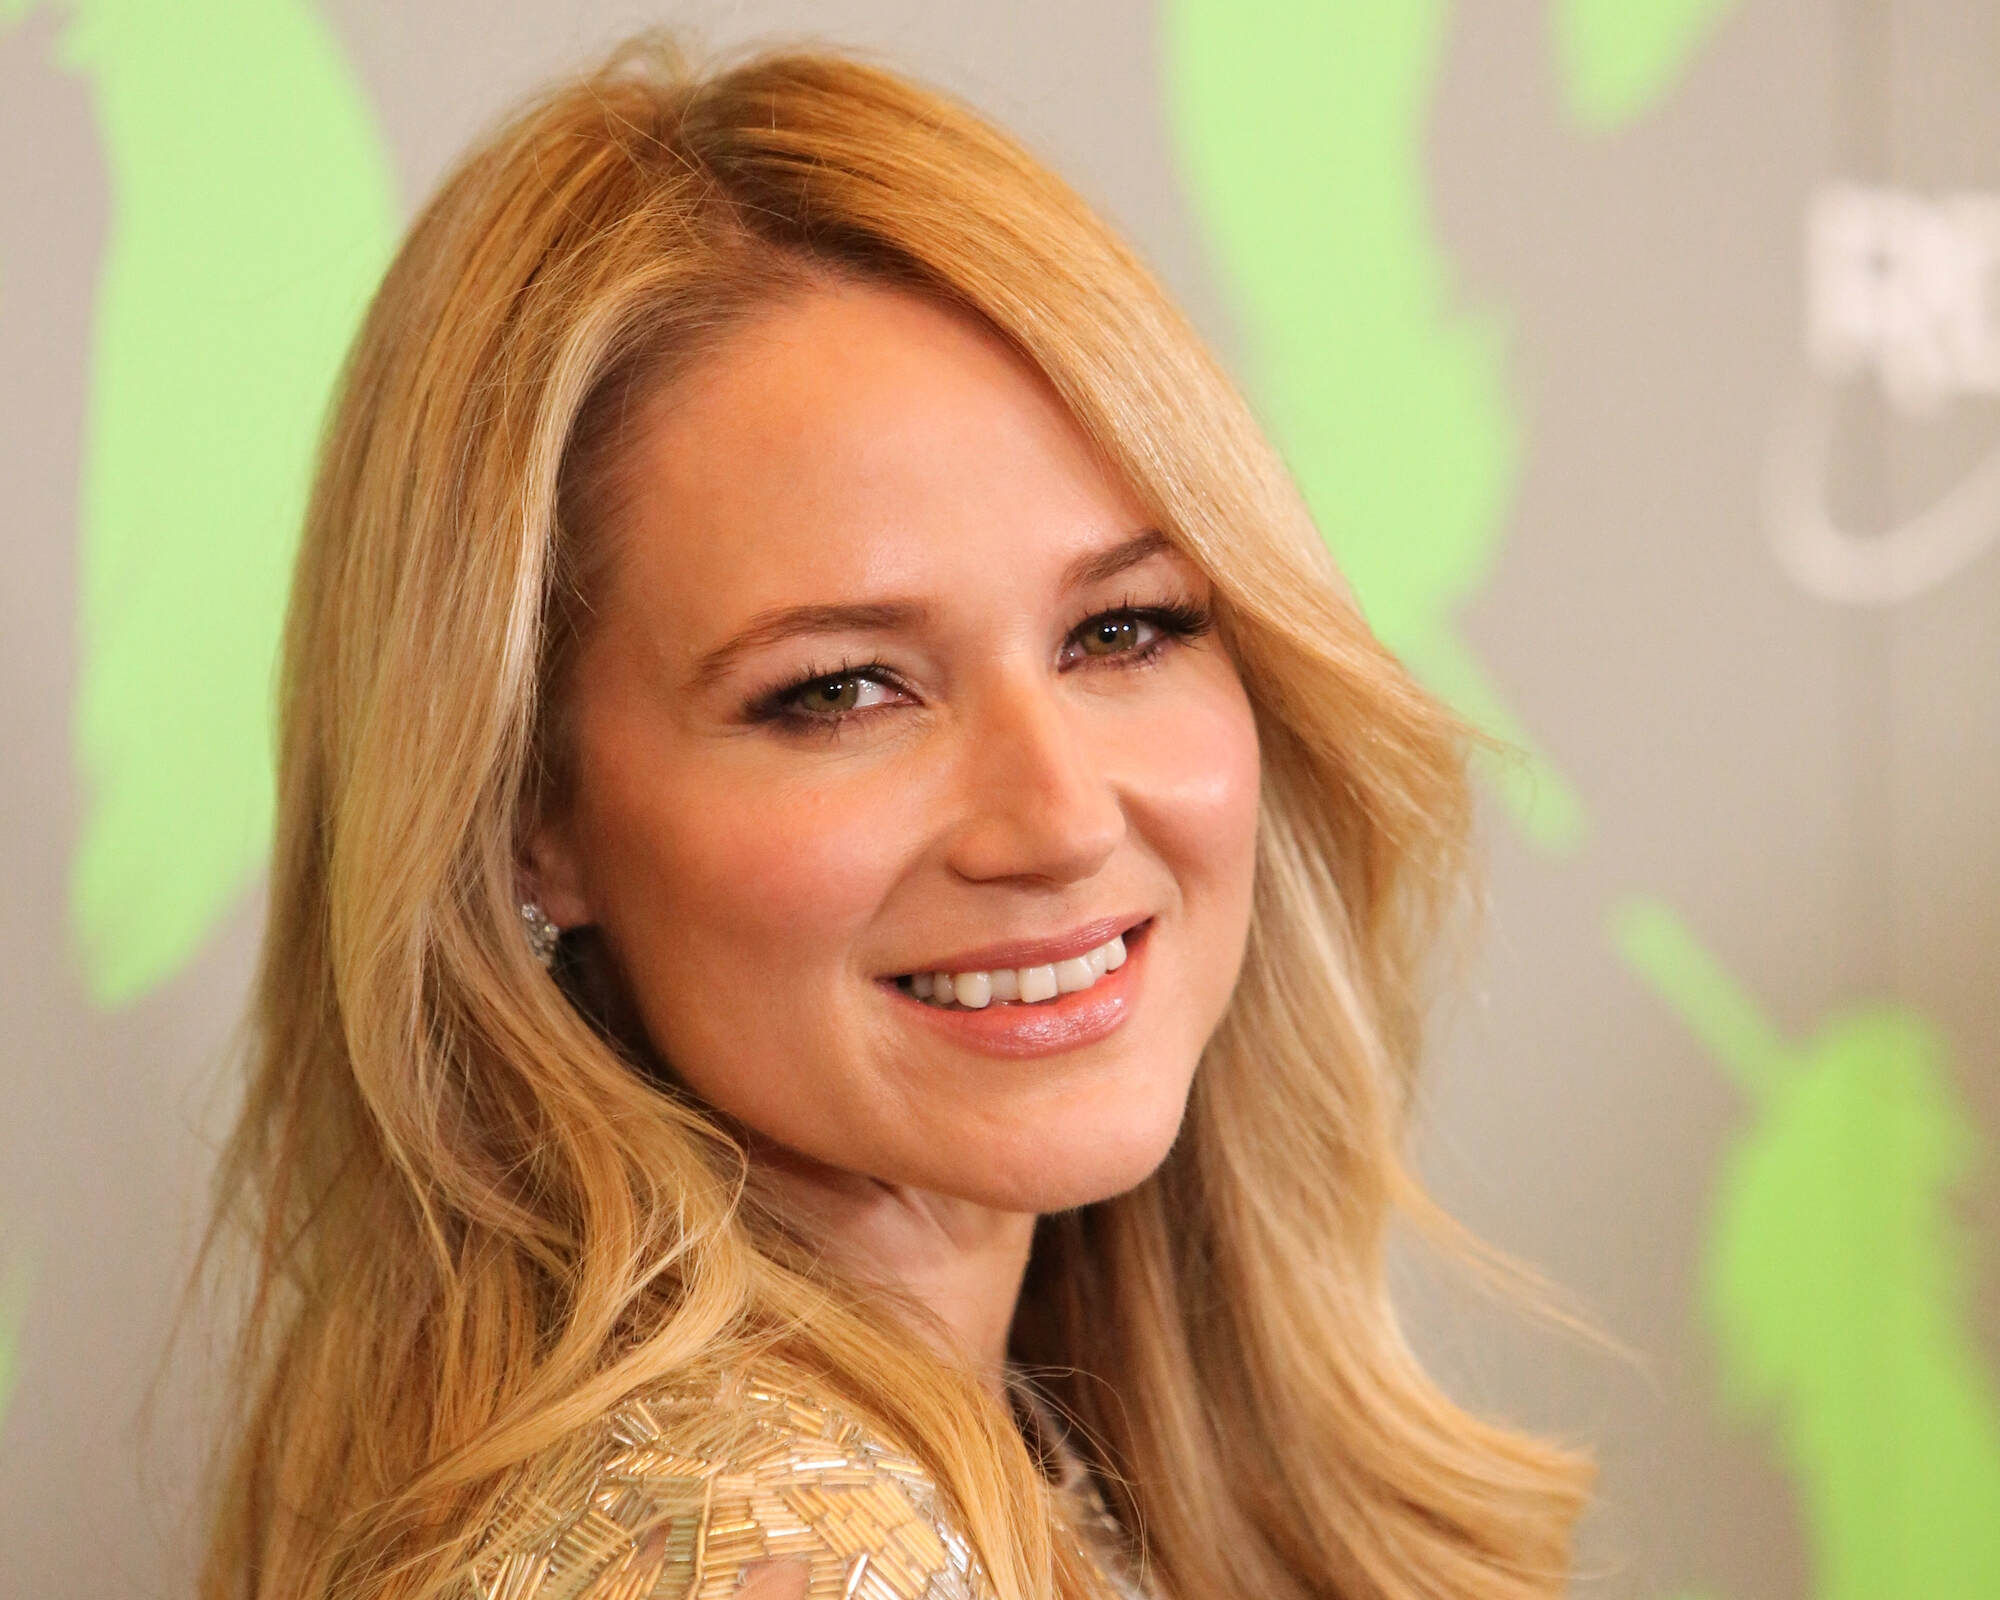 How Old Is The Singer Jewel